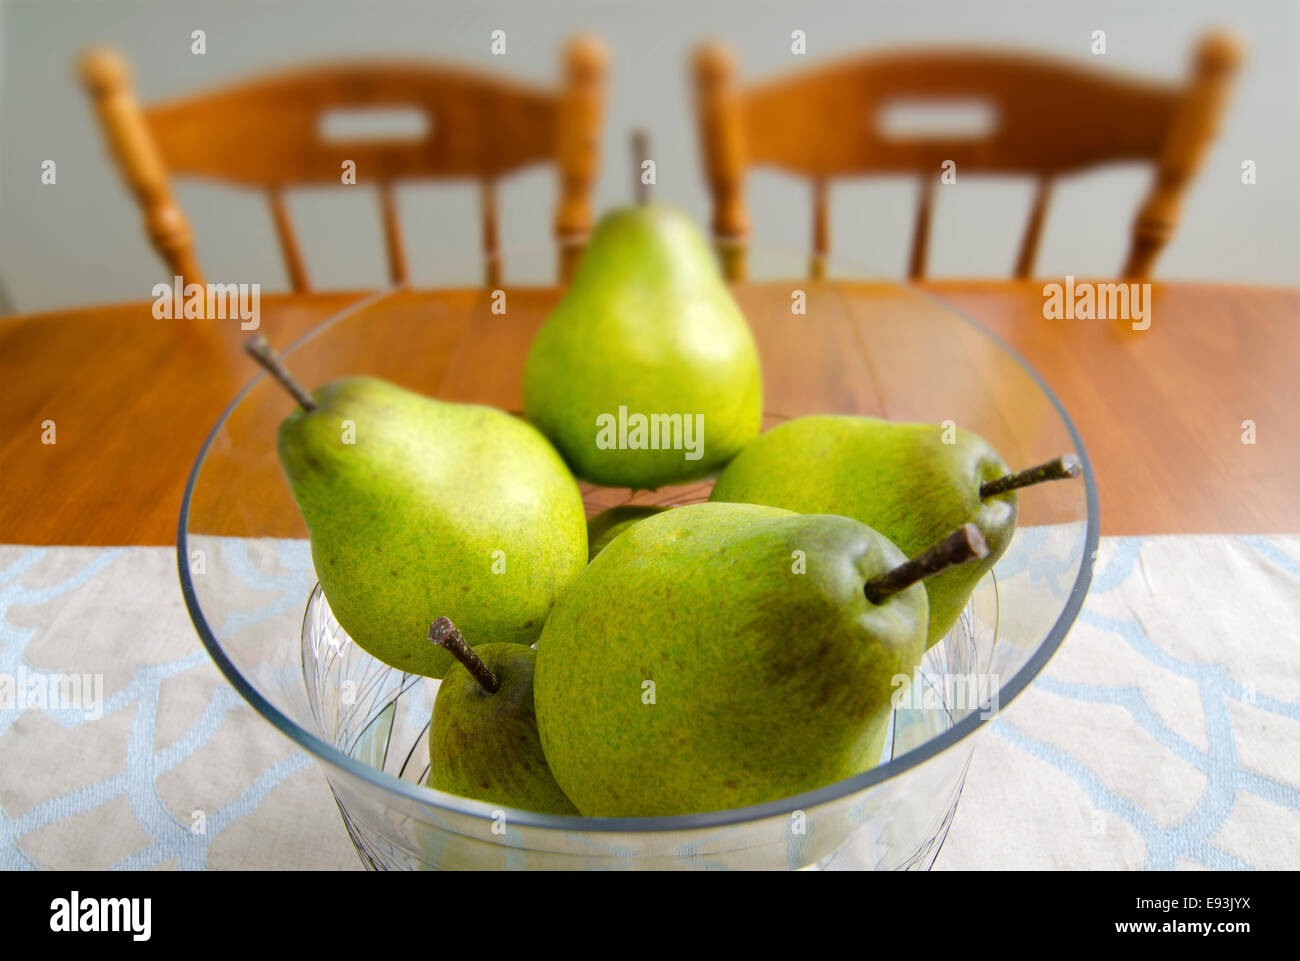 Pears are placed in a decorative bowl and used as a centerpiece on a dining room table. Stock Photo